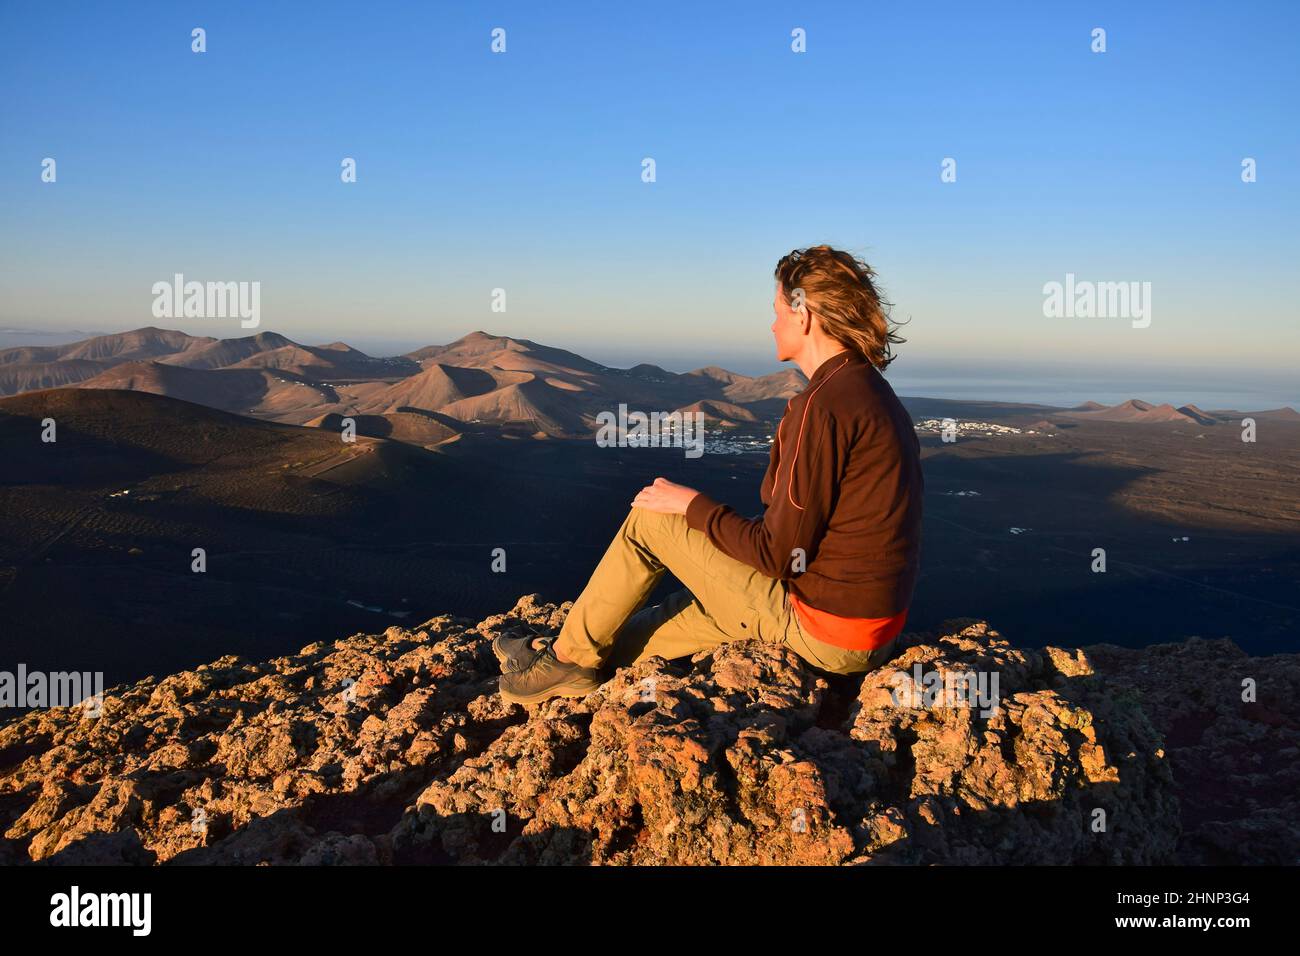 Sunrise in Lanzarote. A woman sitting on a mountain, overlooking the volcanic landscape with the small towns Yaiza and Uga. Canary Islands, Spain. Stock Photo